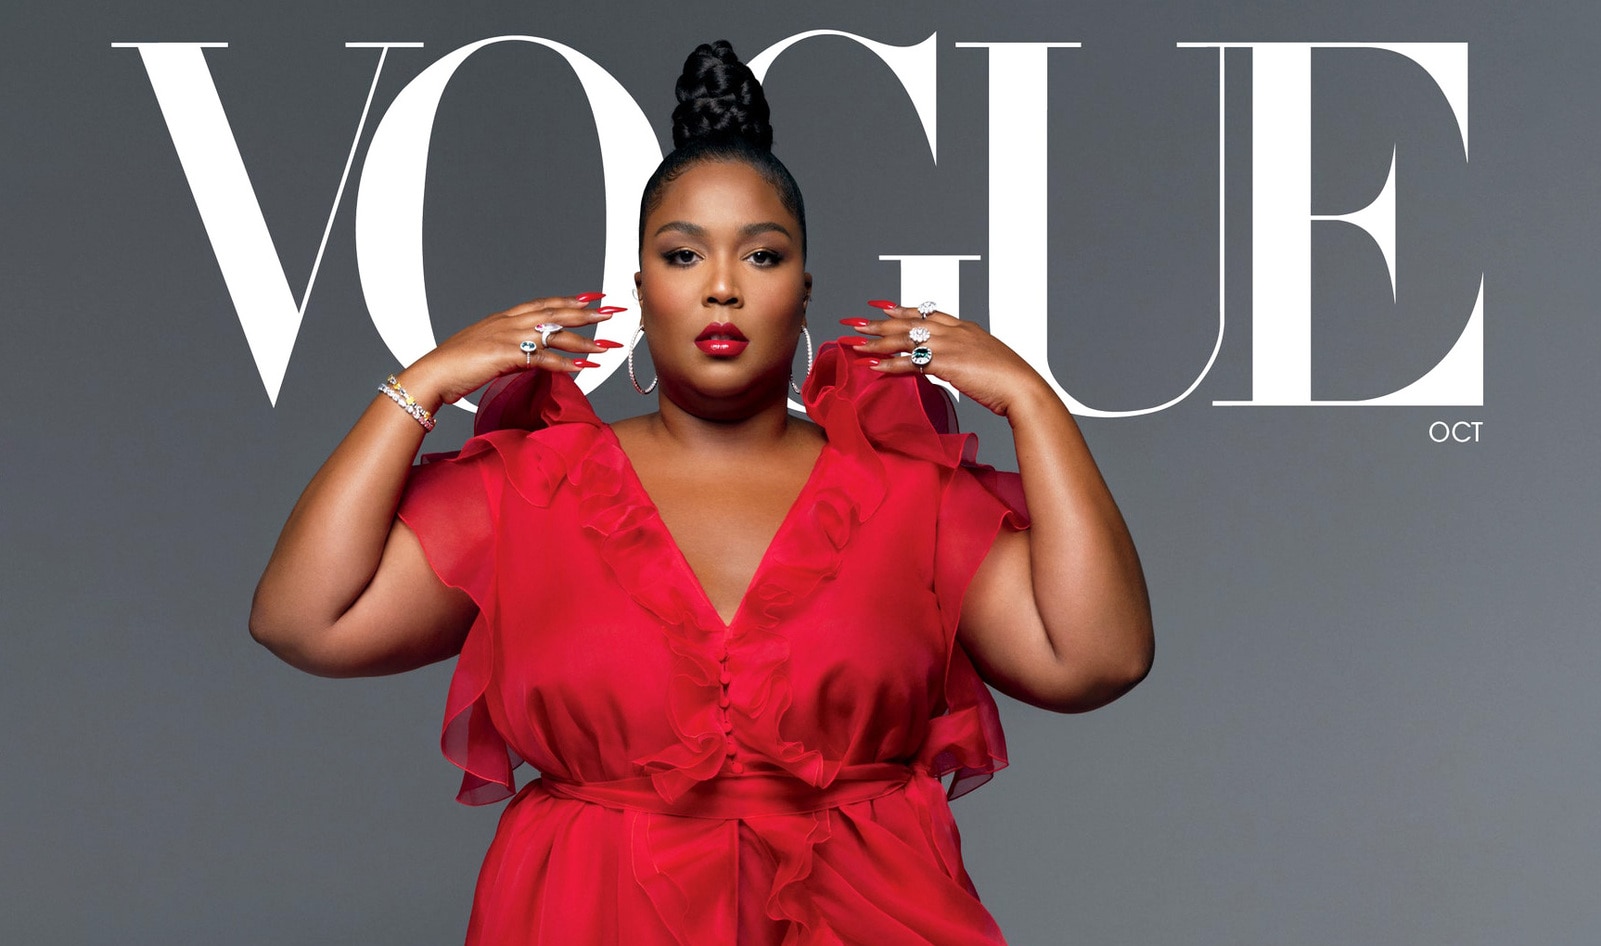 Vegan Artist Lizzo Becomes First Plus-Sized Black Woman on <i>Vogue</i> Cover